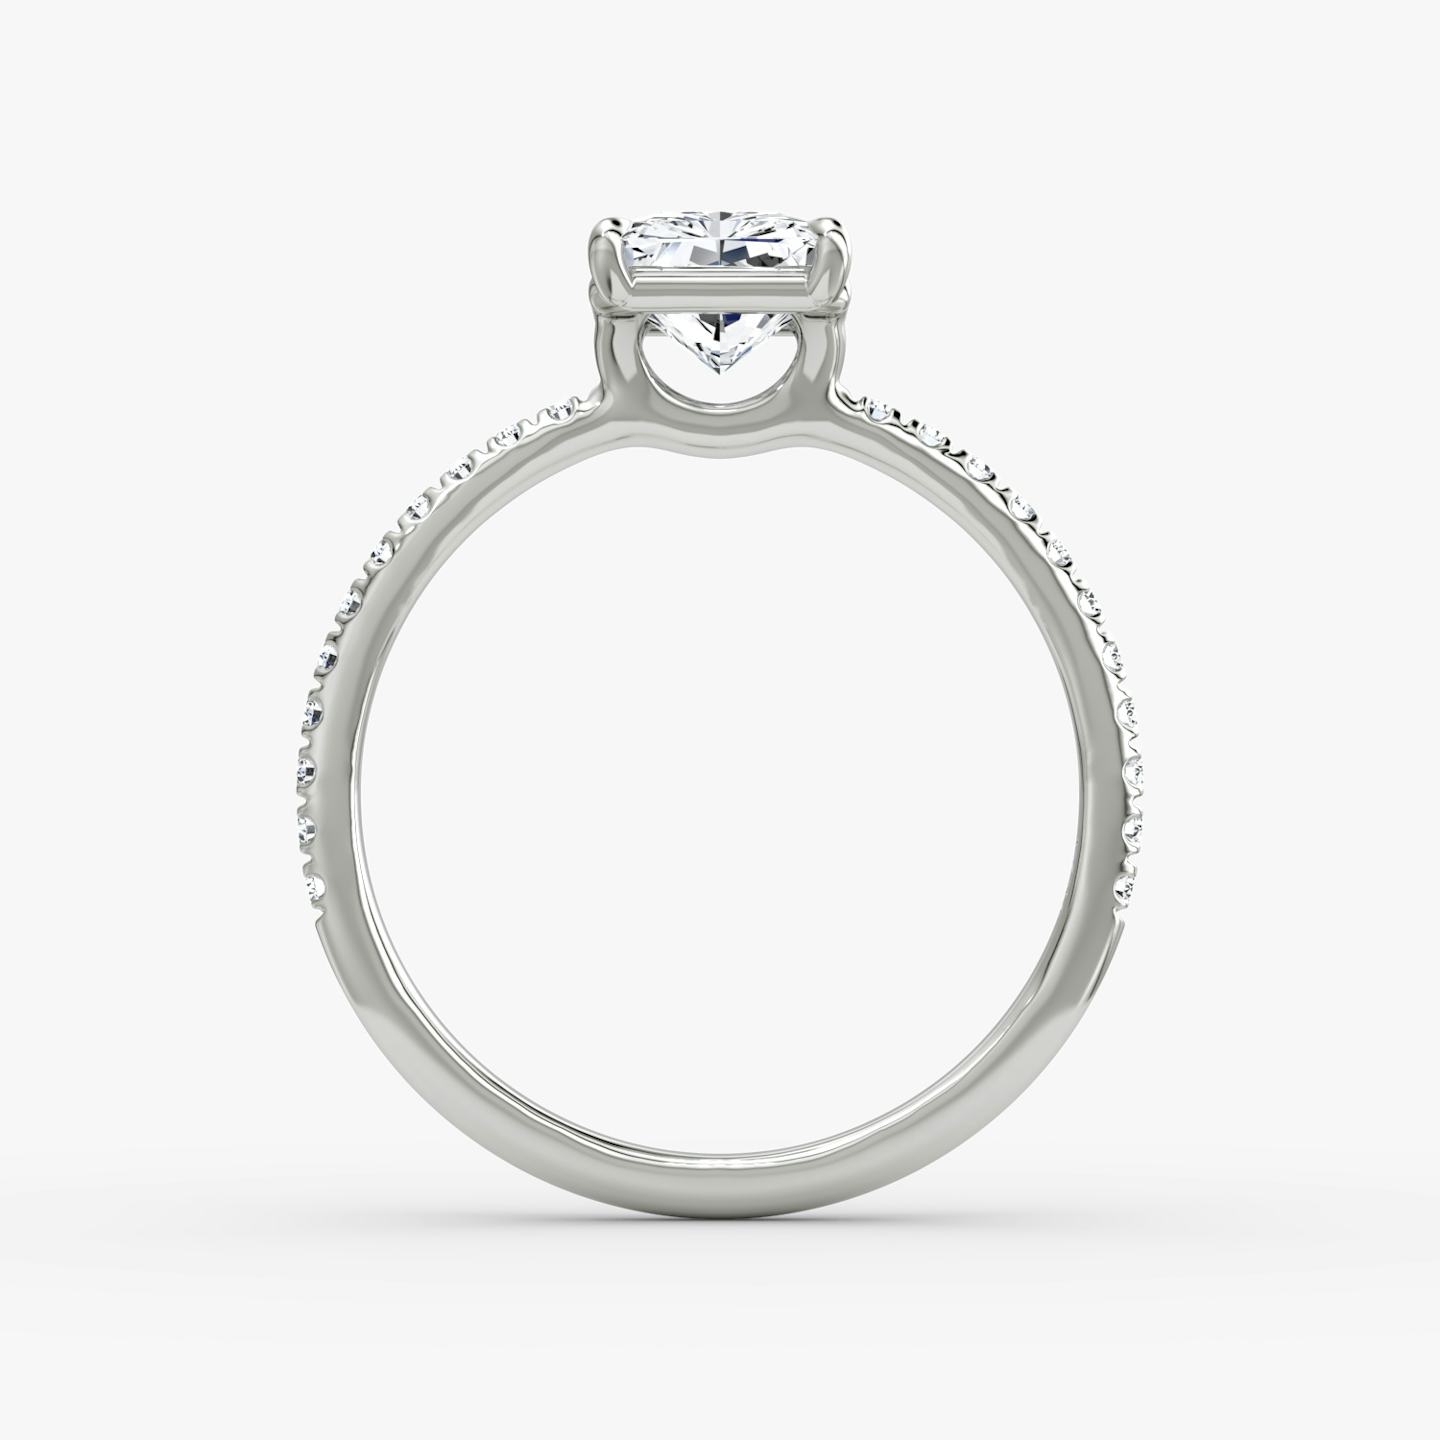 The Signature | Radiant | Platinum | Band width: Standard | Band: Pavé | Setting style: Plain | Diamond orientation: vertical | Carat weight: See full inventory